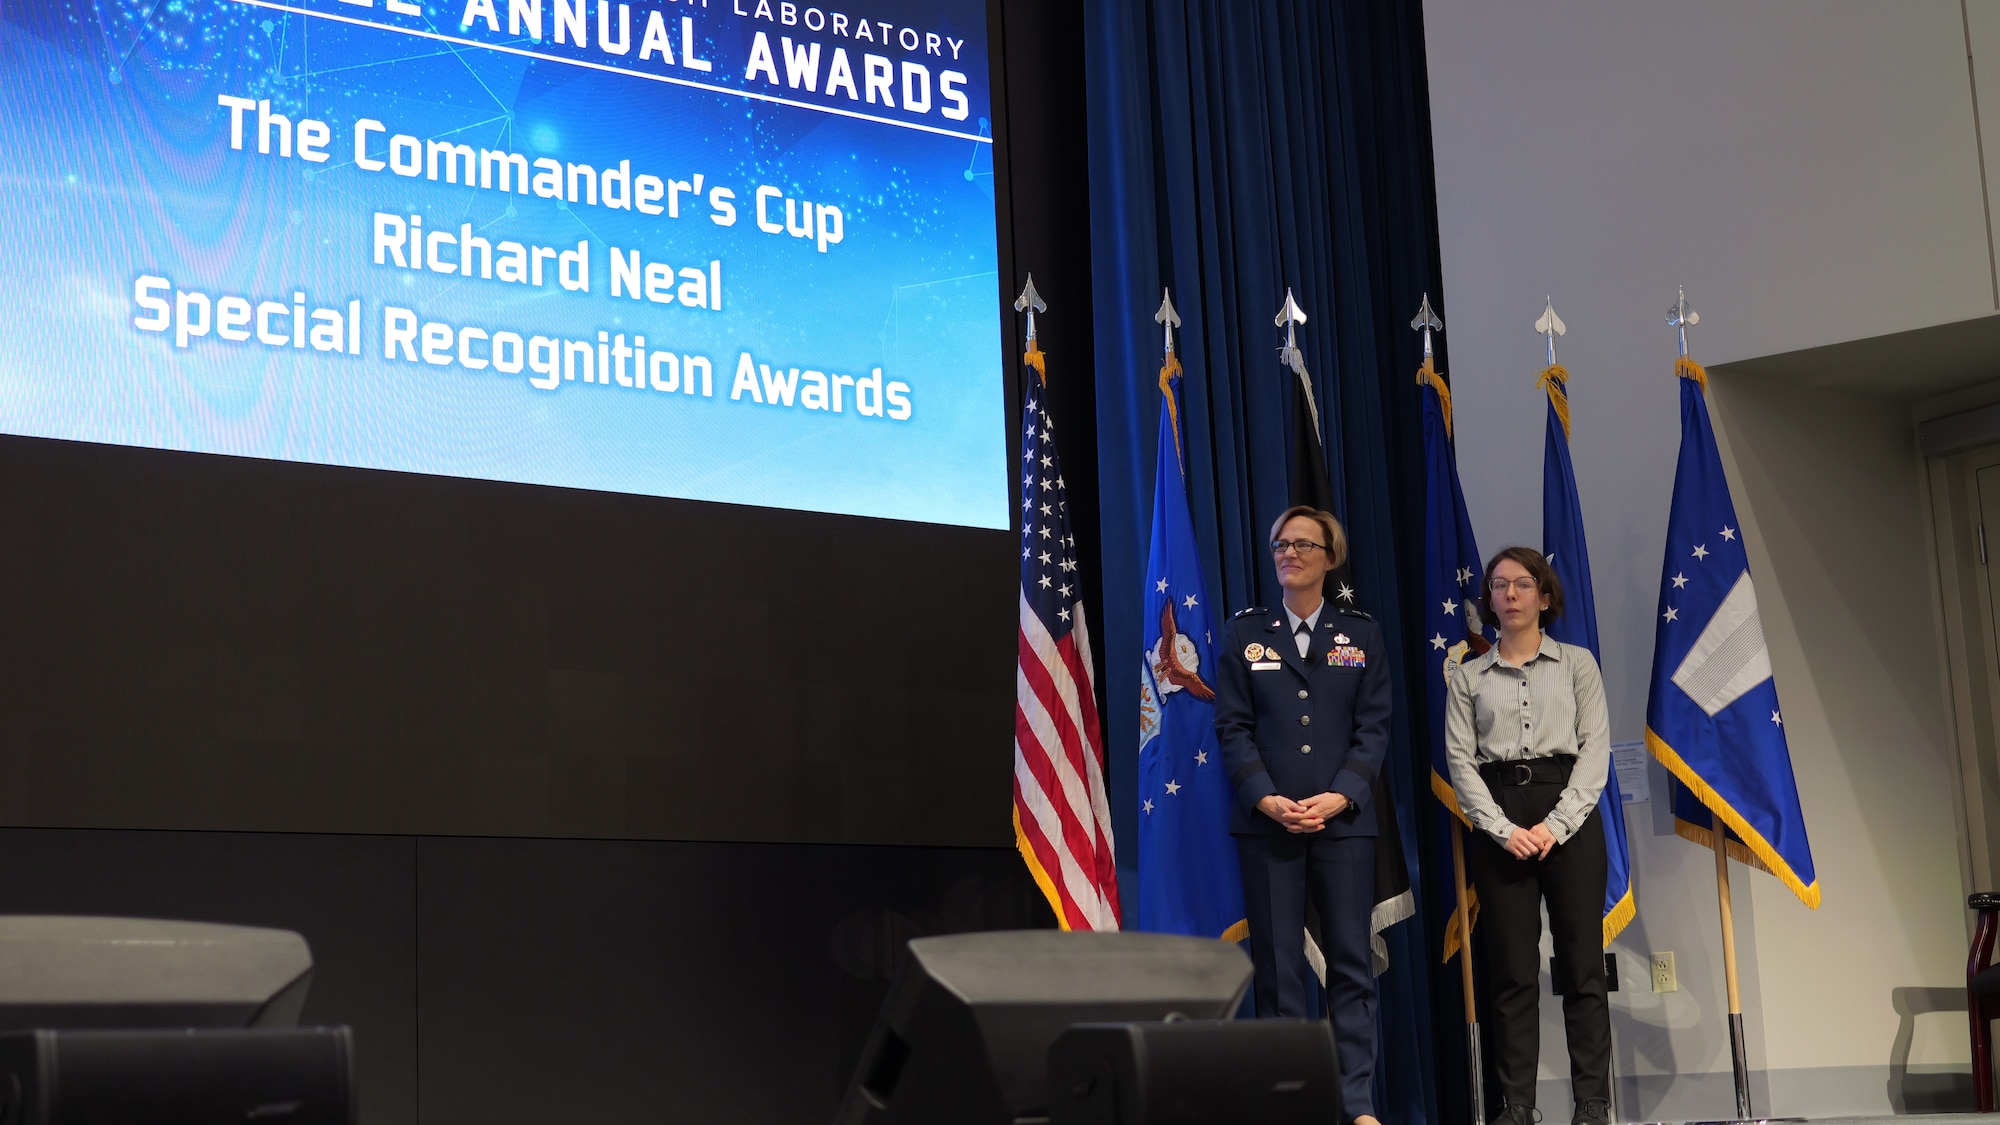 Maj. Gen. Heather Pringle, Air Force Research Laboratory, or AFRL, commander and Abby Neal, Richard Neal’s daughter, present the Commander’s Cup Richard Neal Special Recognition Awards at the 2022 AFRL Annual Awards Ceremony at the Air Force Institute of Technology's Kenney Hall at Wright-Patterson Air Force Base, Ohio, March 2, 2023. The Richard Neal Special Recognition Awards recognize employees unable to compete in other award categories due to the sensitive nature of their work. (U.S. Air Force photo / Keith Lewis)